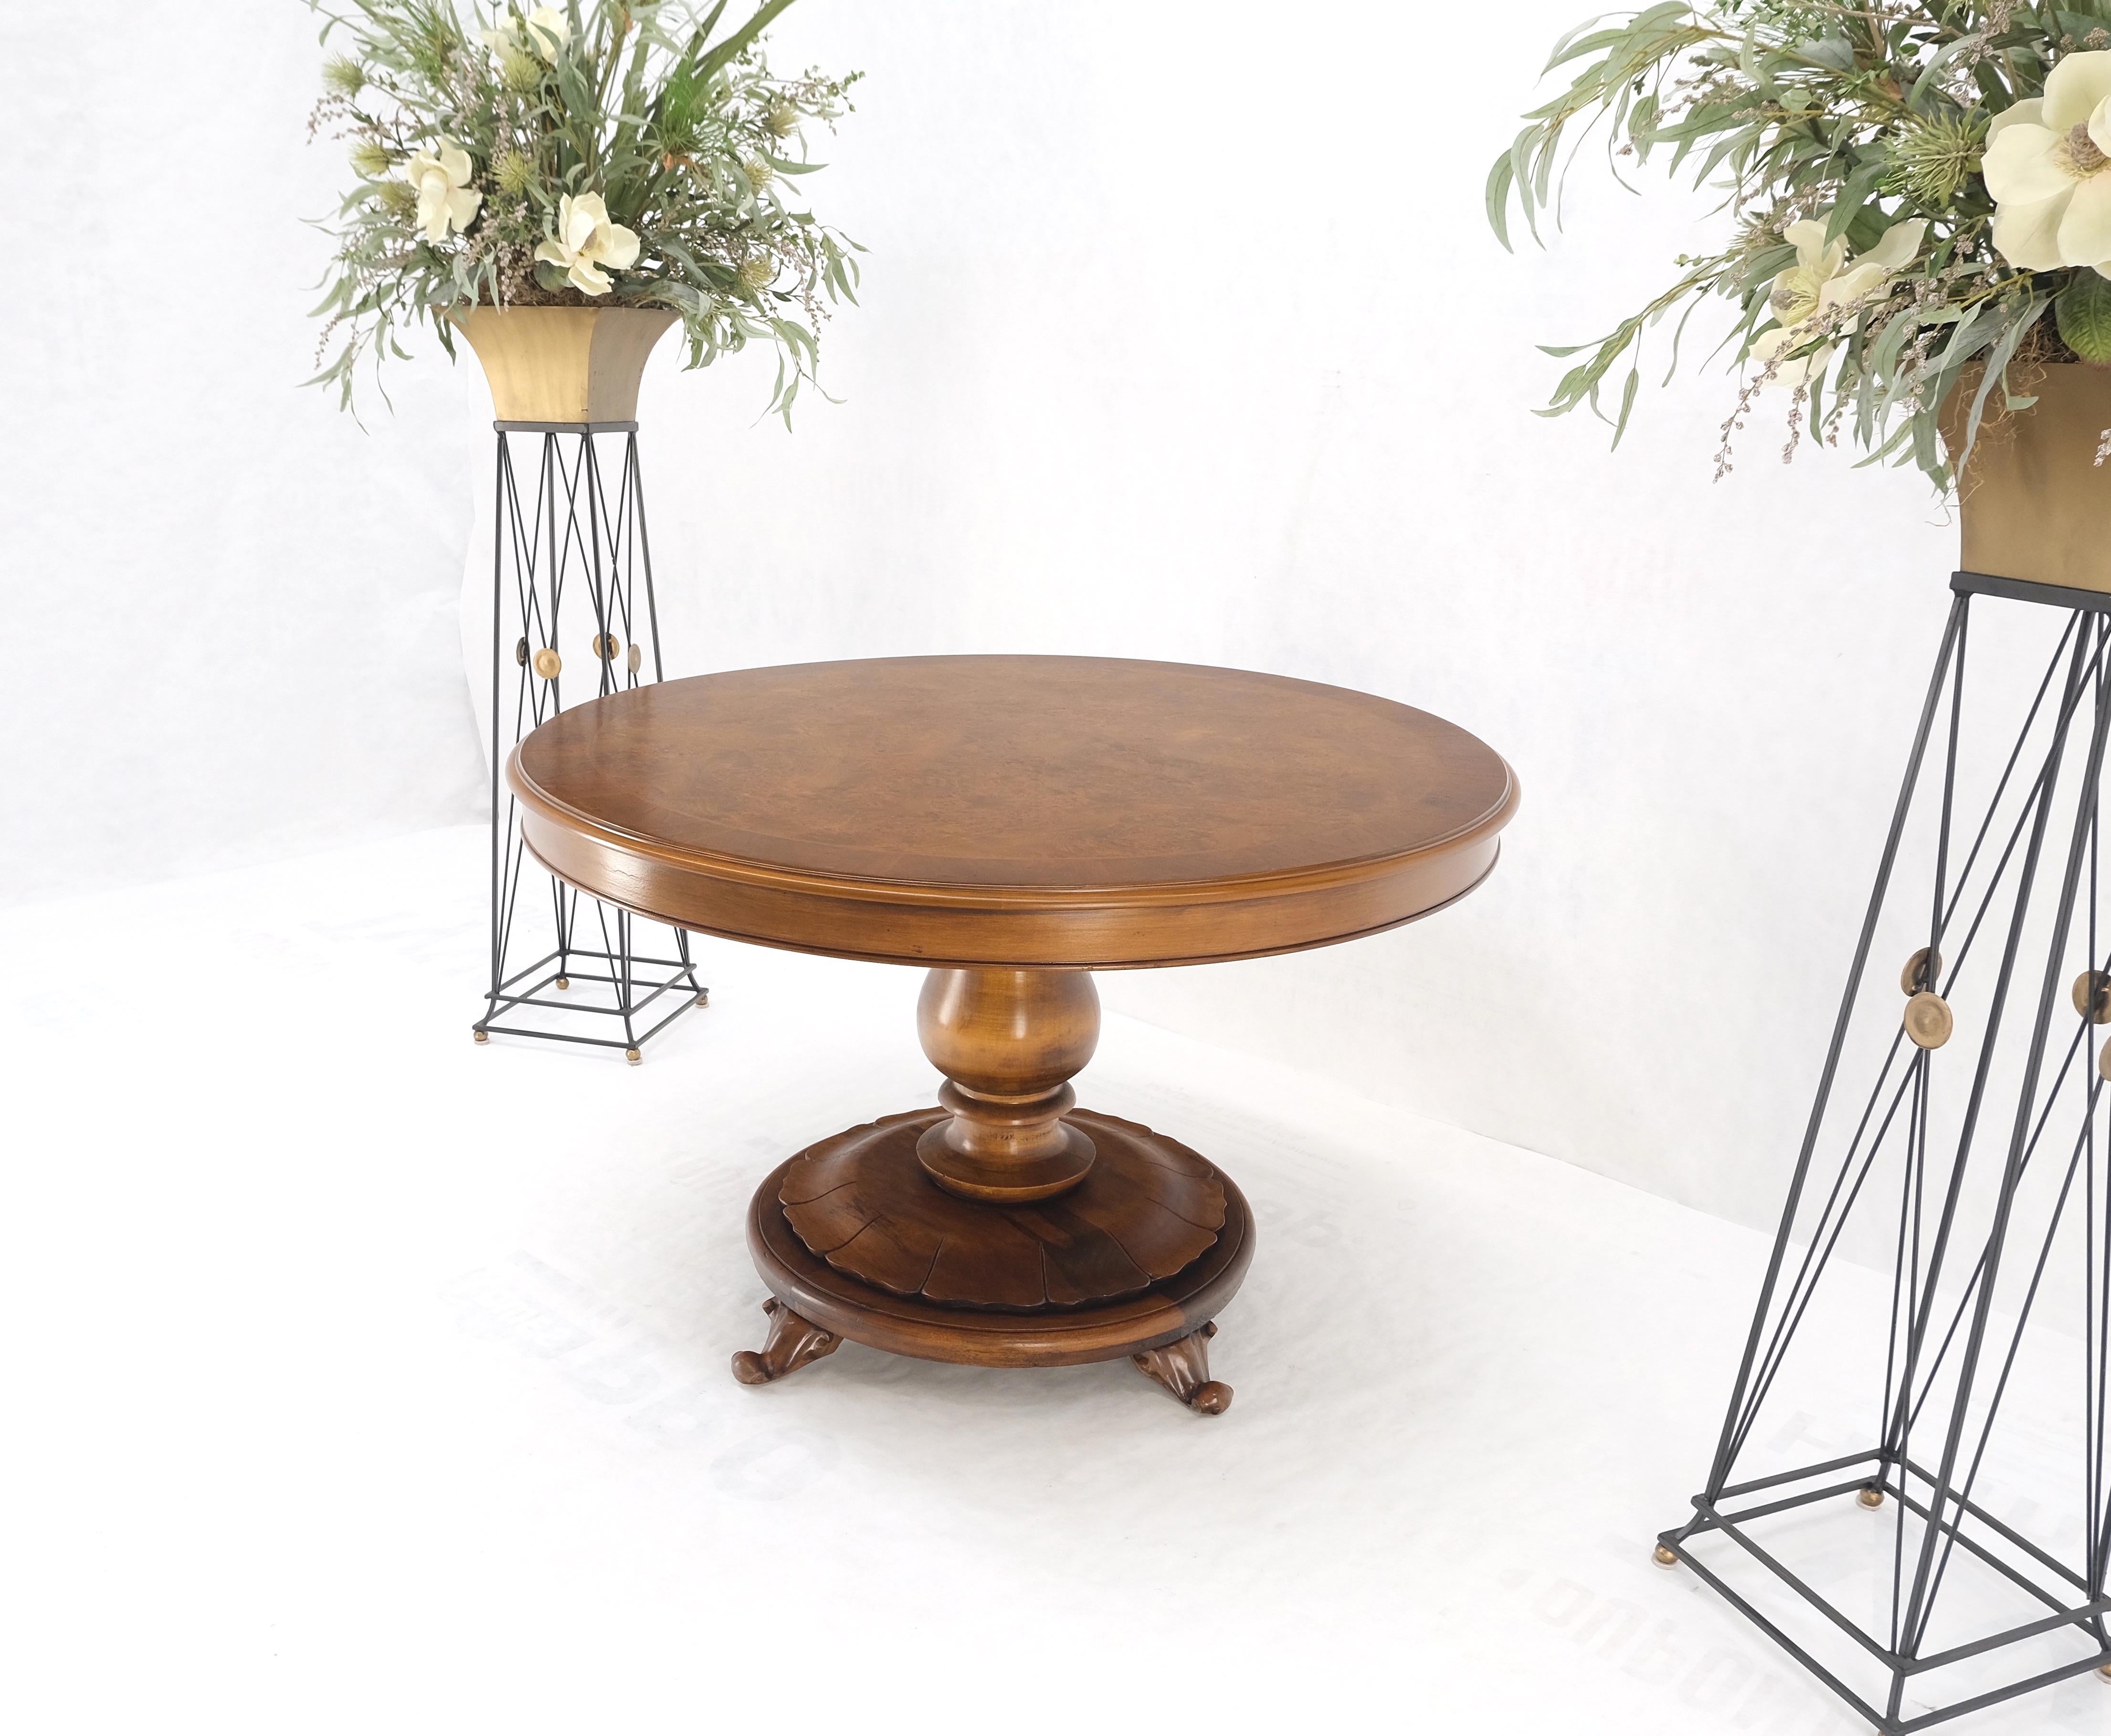 Burl Walnut Wood Top Round Carved Lotus Shape Base Dining Center Table Mint! In Good Condition For Sale In Rockaway, NJ